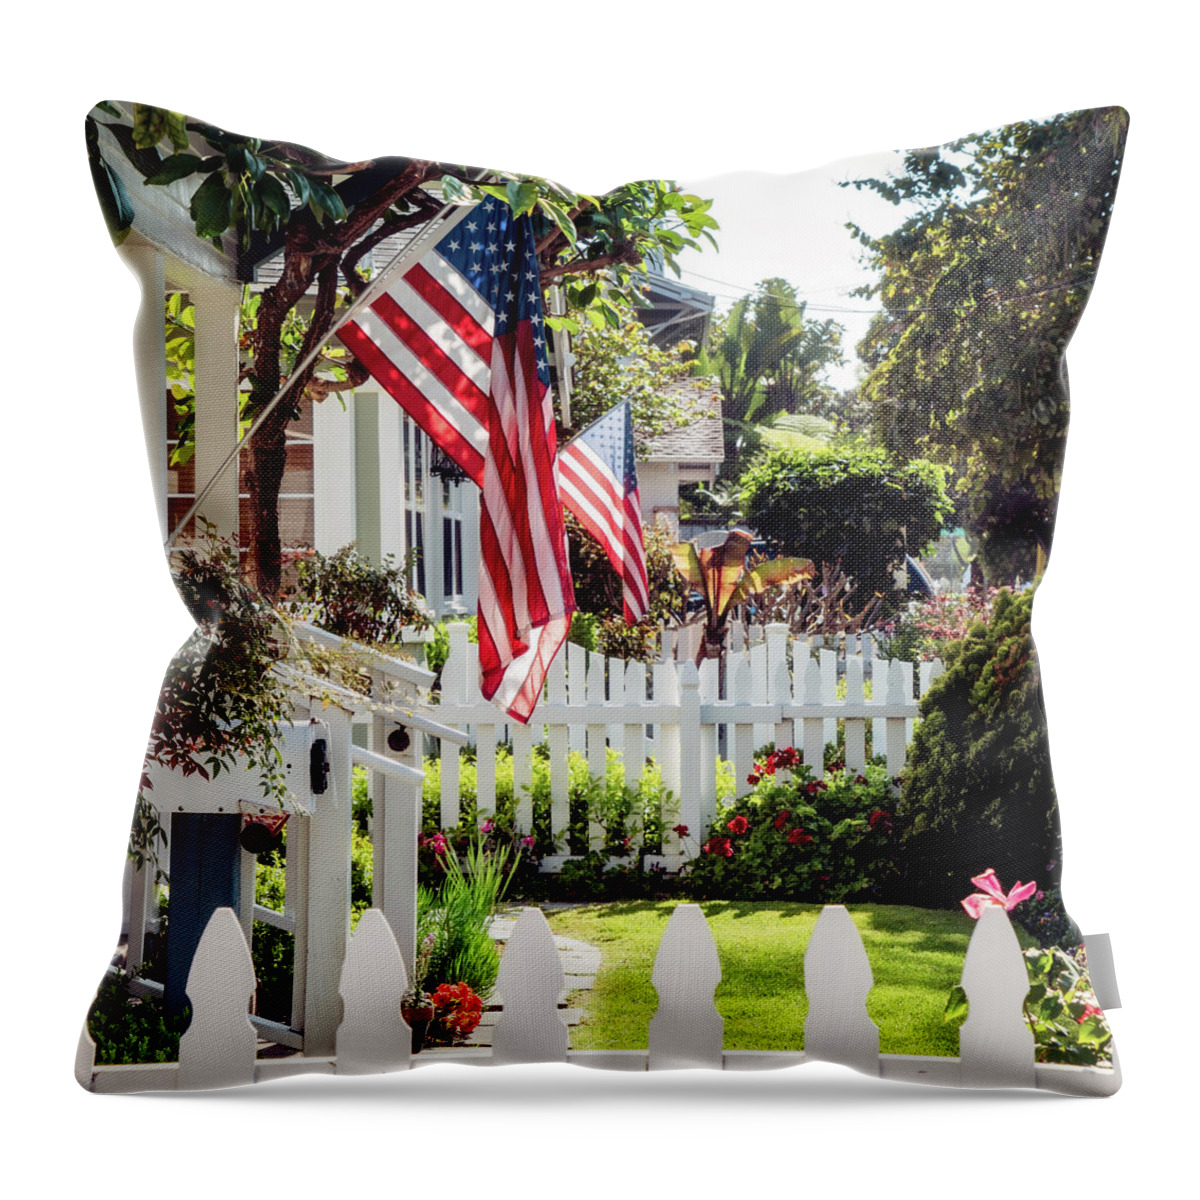 Flowers Throw Pillow featuring the photograph Flags 2 by Bill Chizek